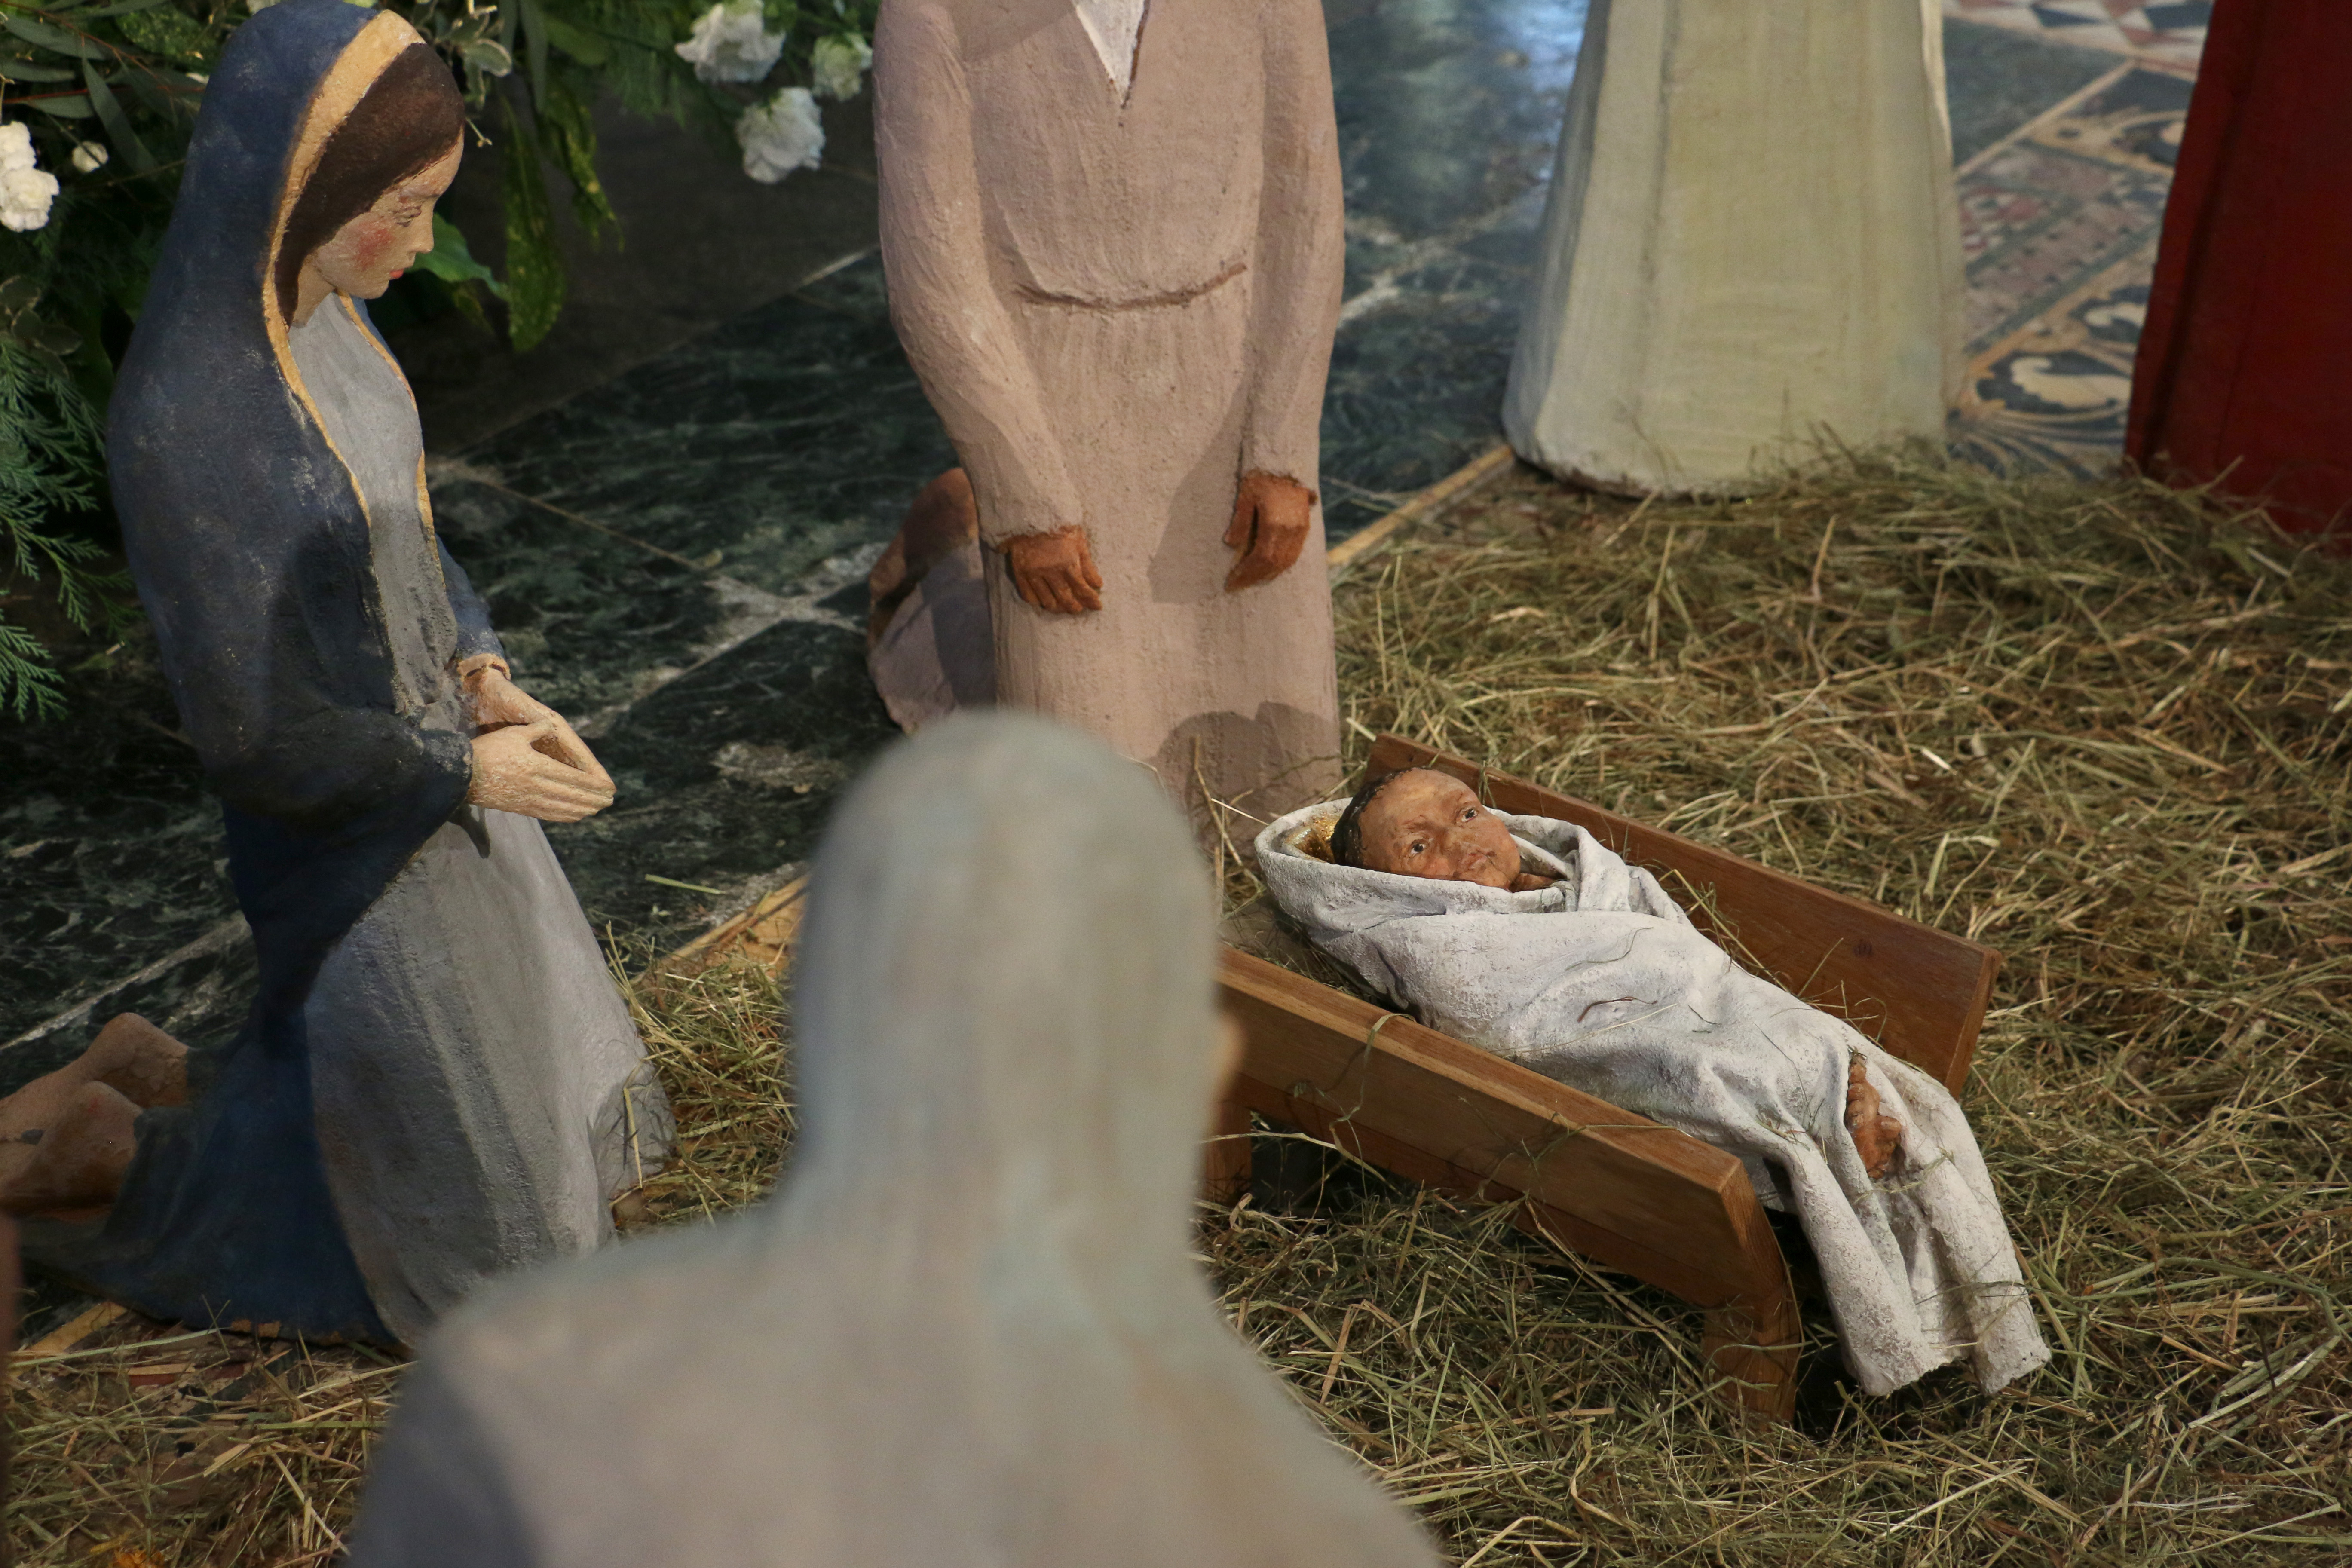 Taken from behind the shoulder of a shepherd sculpture, the Christ child lays in front of Mary and Joseph sculptures